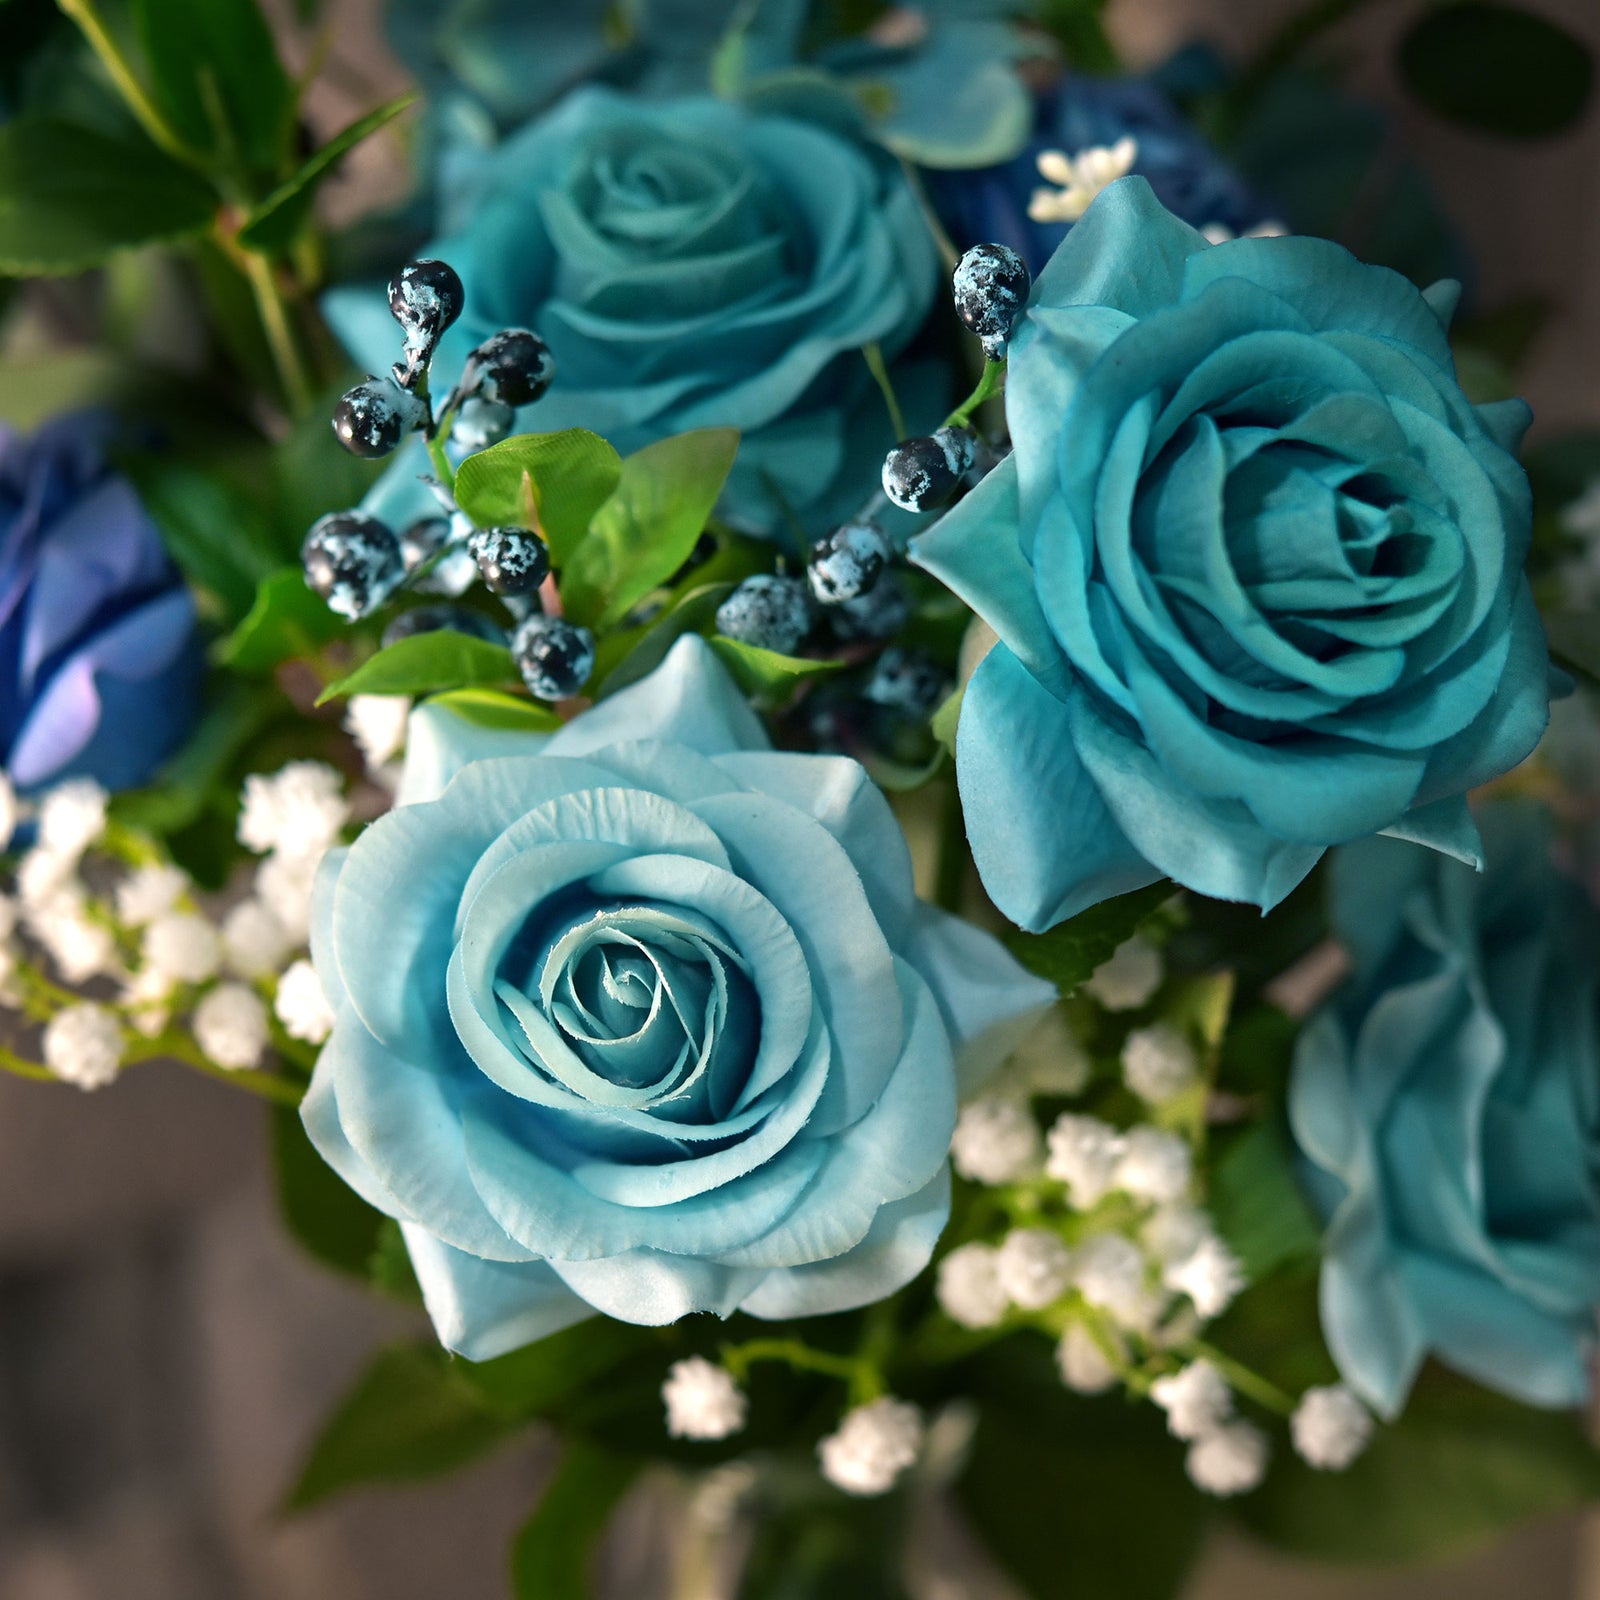 Real Touch 10 Stems Dark Turquoise Silk Artificial Roses Flowers ‘Petals Feel and Look like Fresh Roses'